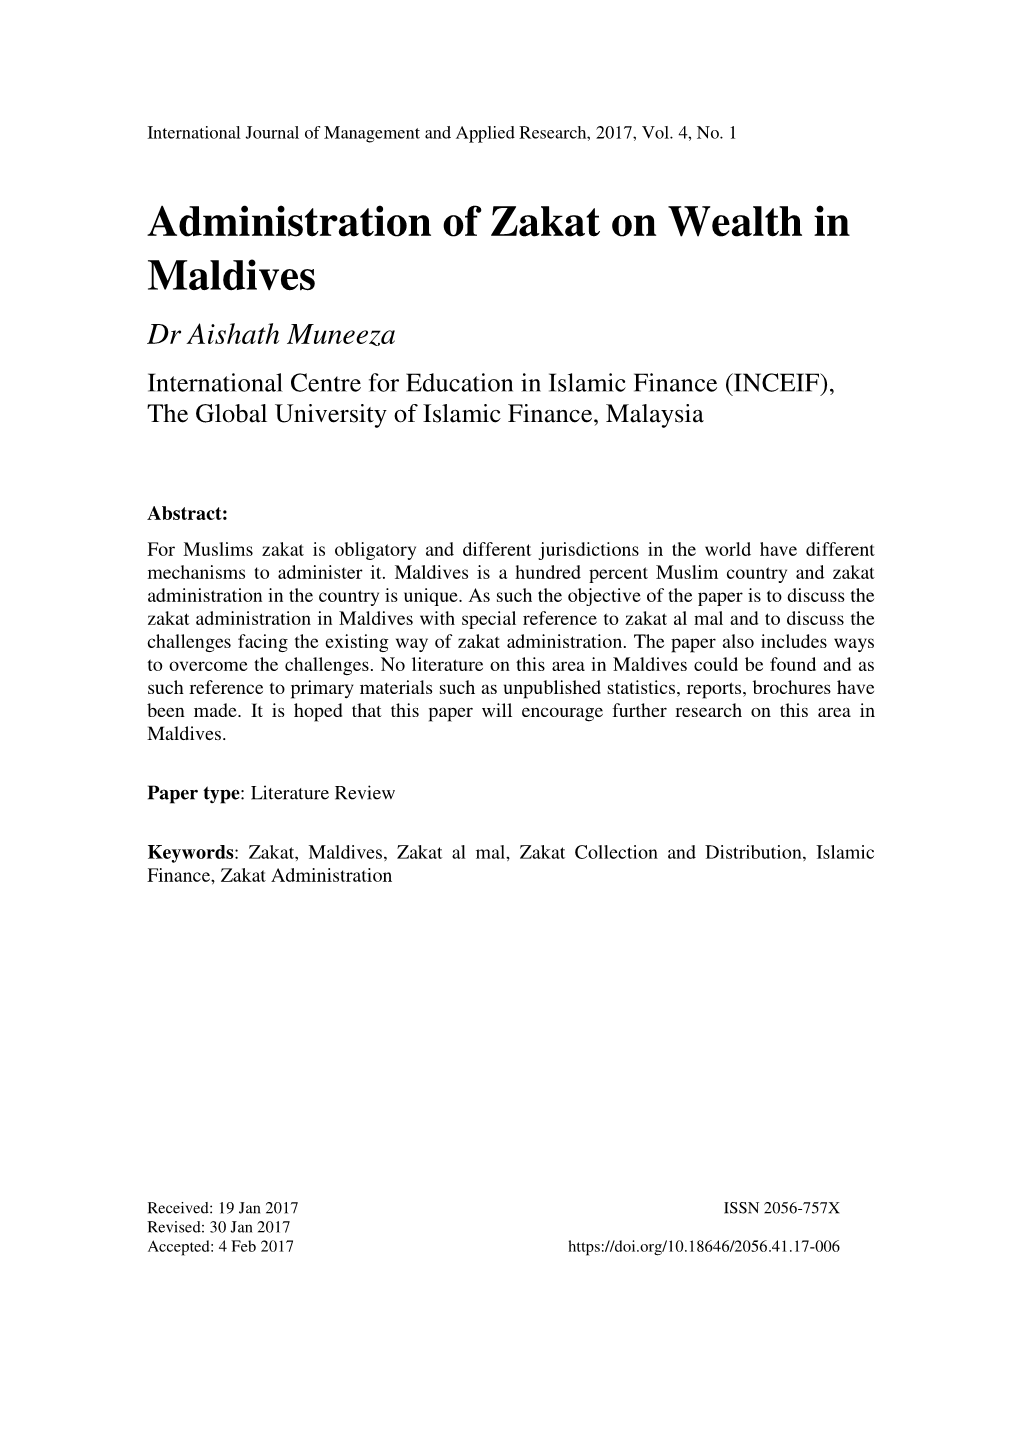 Administration of Zakat on Wealth in Maldives